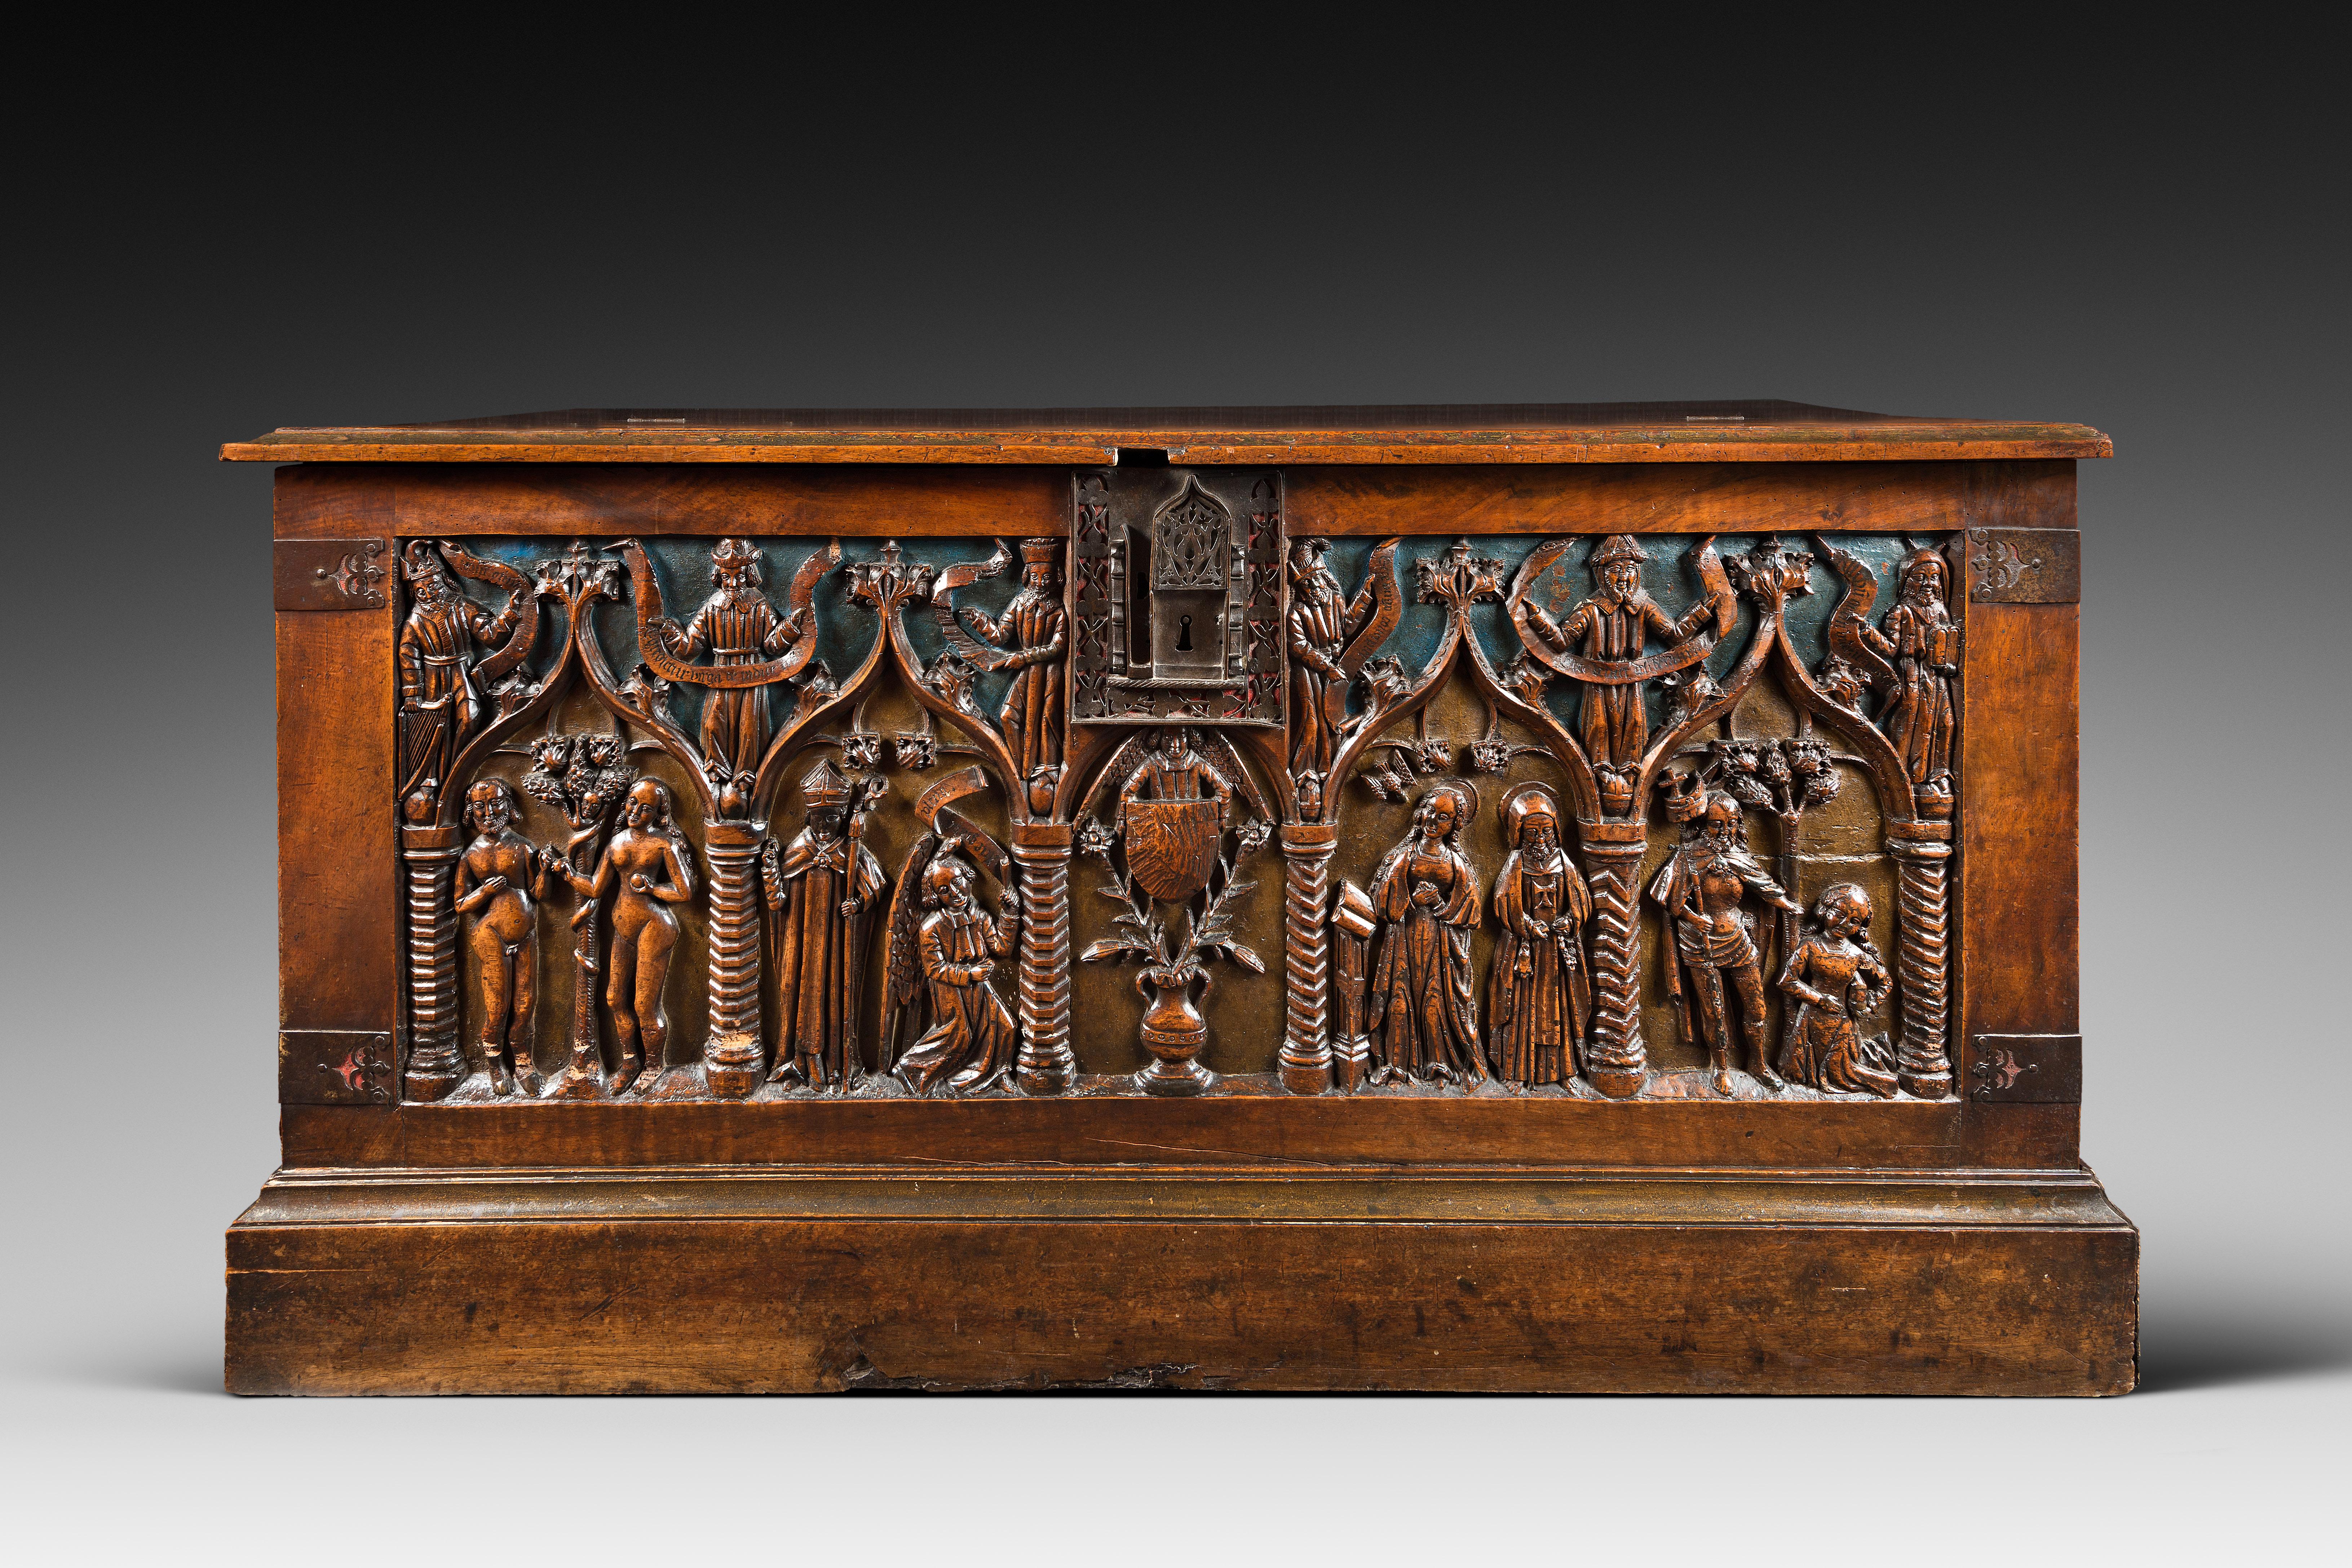 Provenance : 
Collection of Pierre Louis Bresset
Collection of Gustave Eiffel

Fine traces of blue and golden pigment

This walnut state-chest is composed of elements dovetailed on the back. The exceptionnally rich facade is made of an only